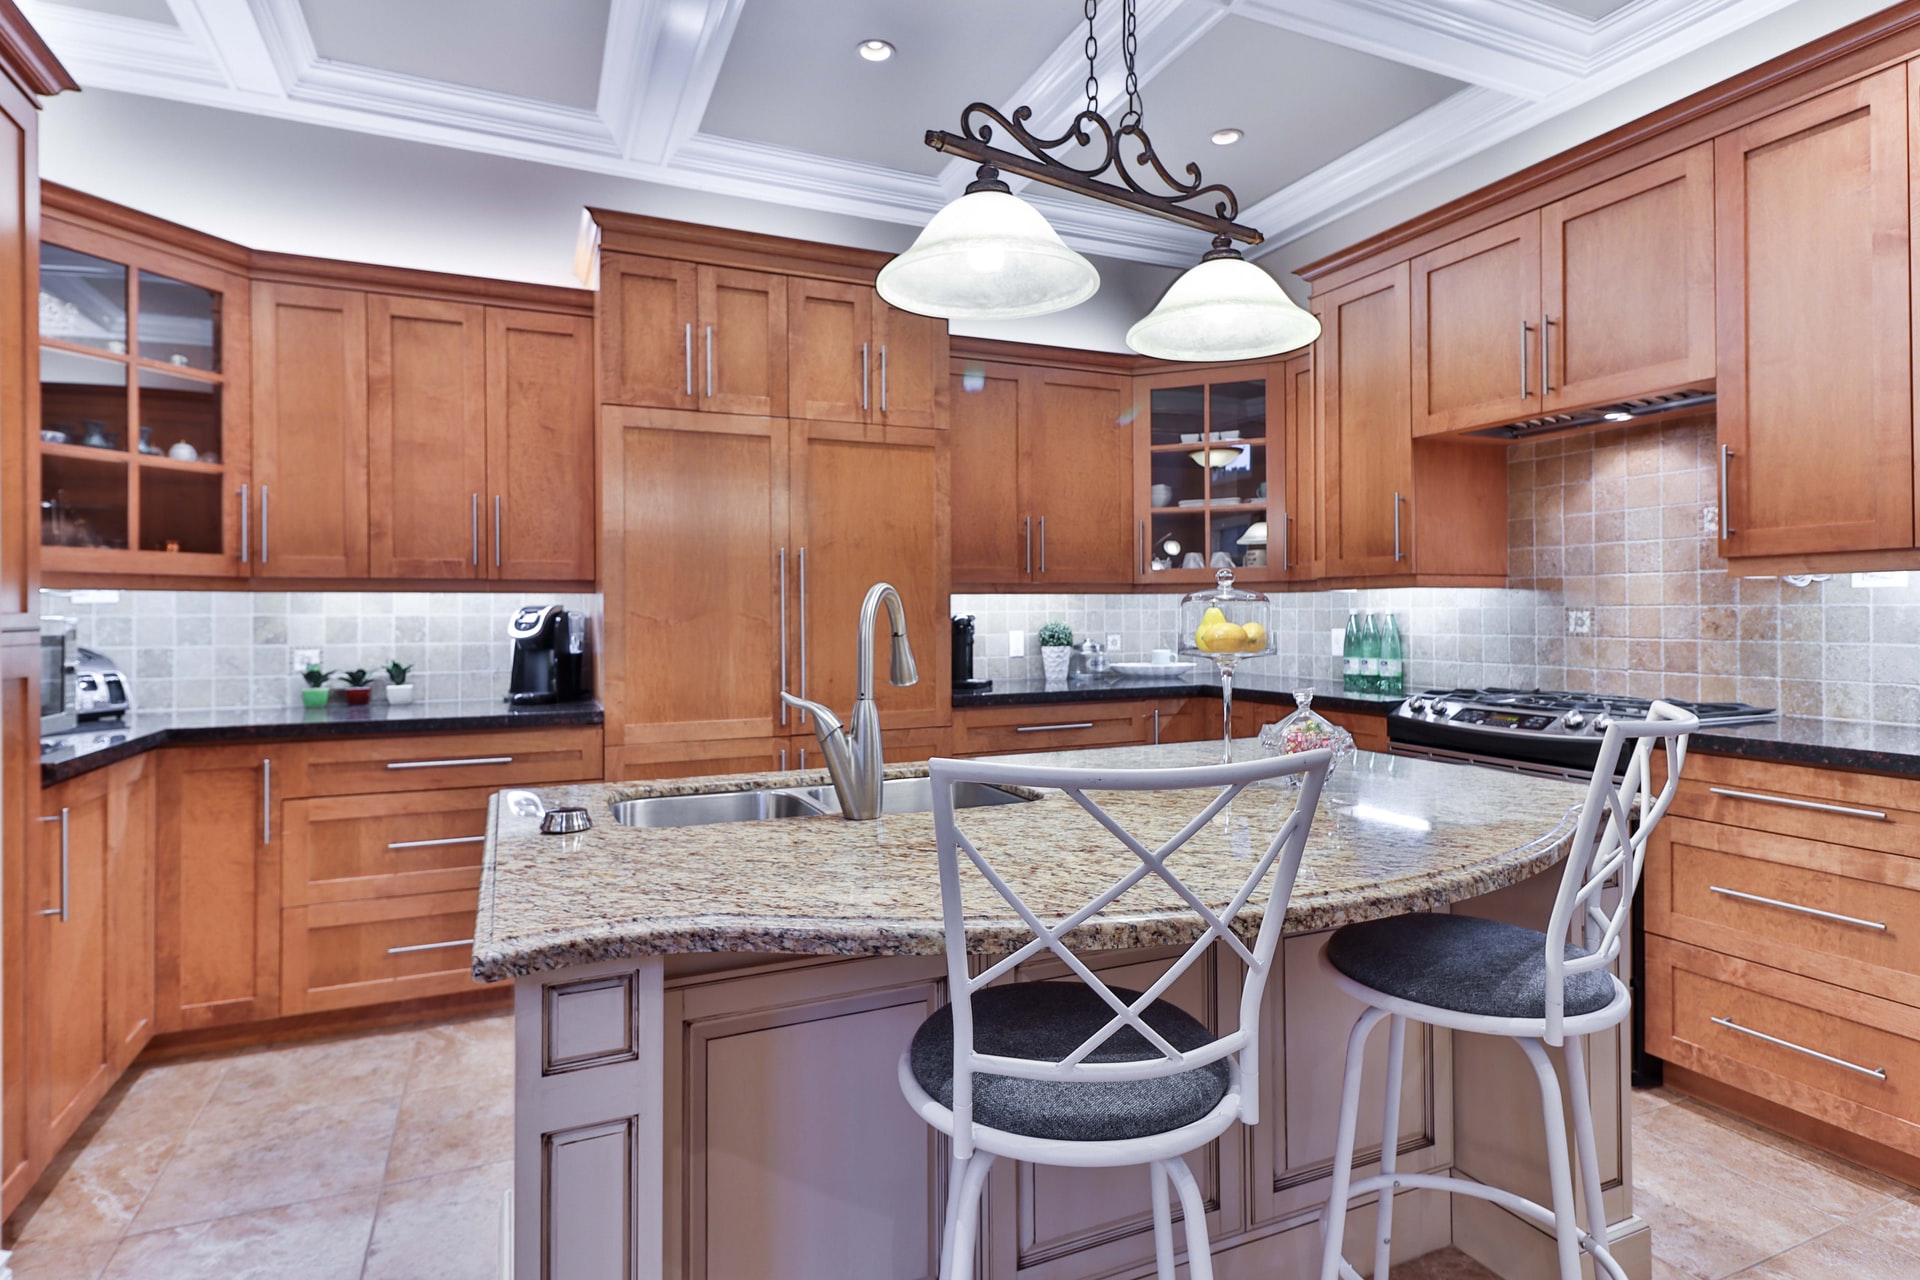 How Much Does it Cost to Renovate a Kitchen